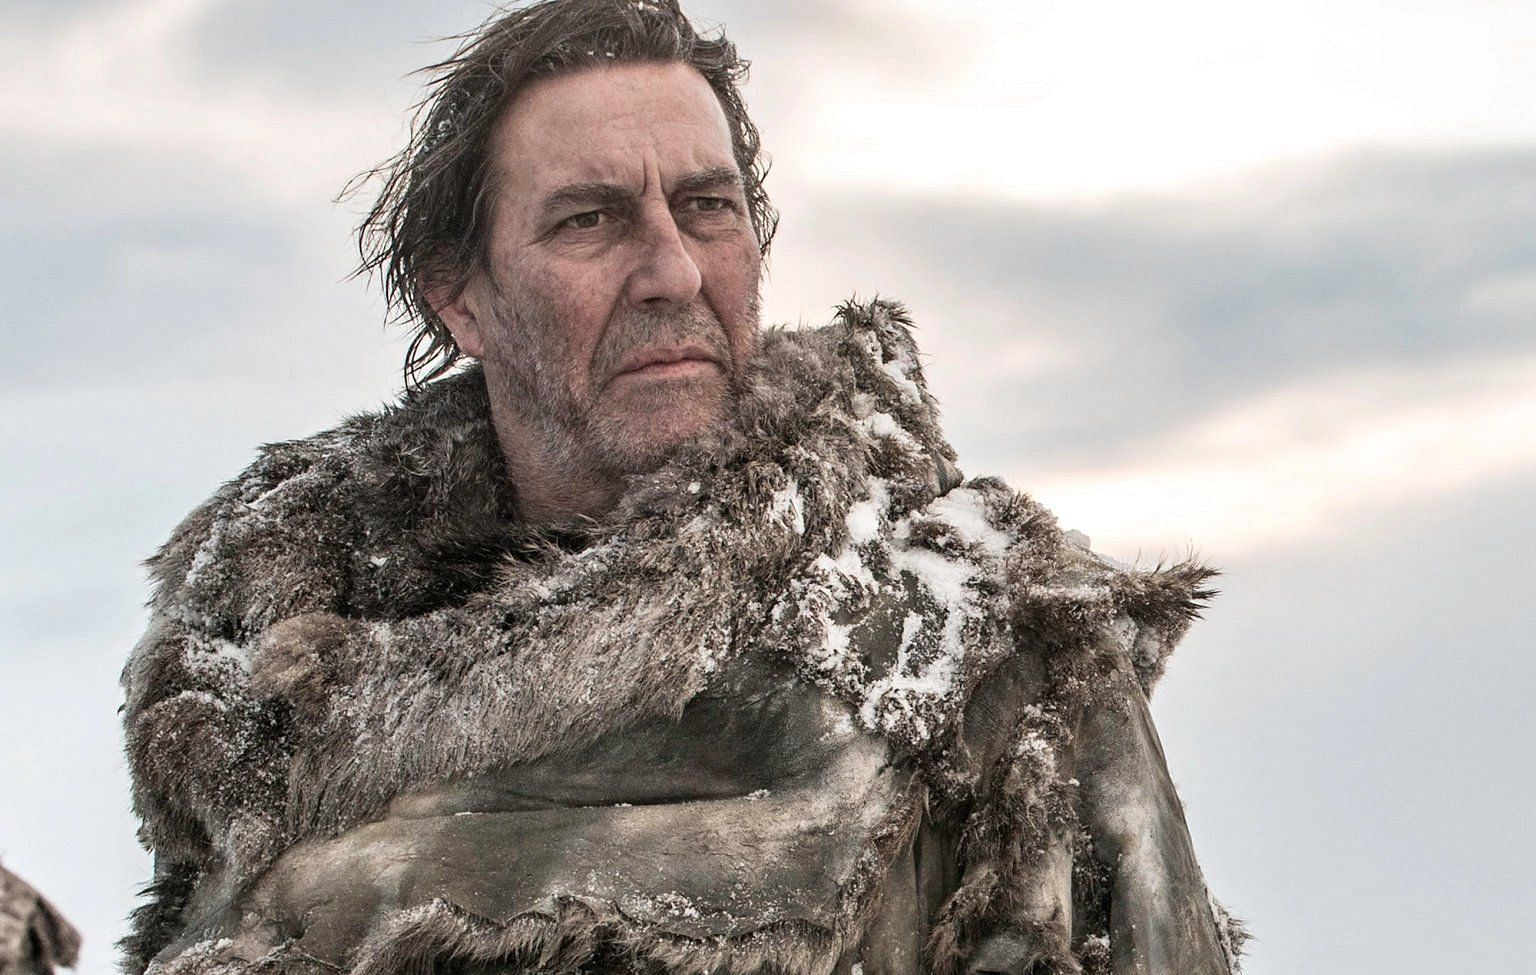 Game of Thrones actor Ciar&aacute;n Hinds is joining The Lord of the Rings: The Rings of Power in Season 2 (Image via HBO)